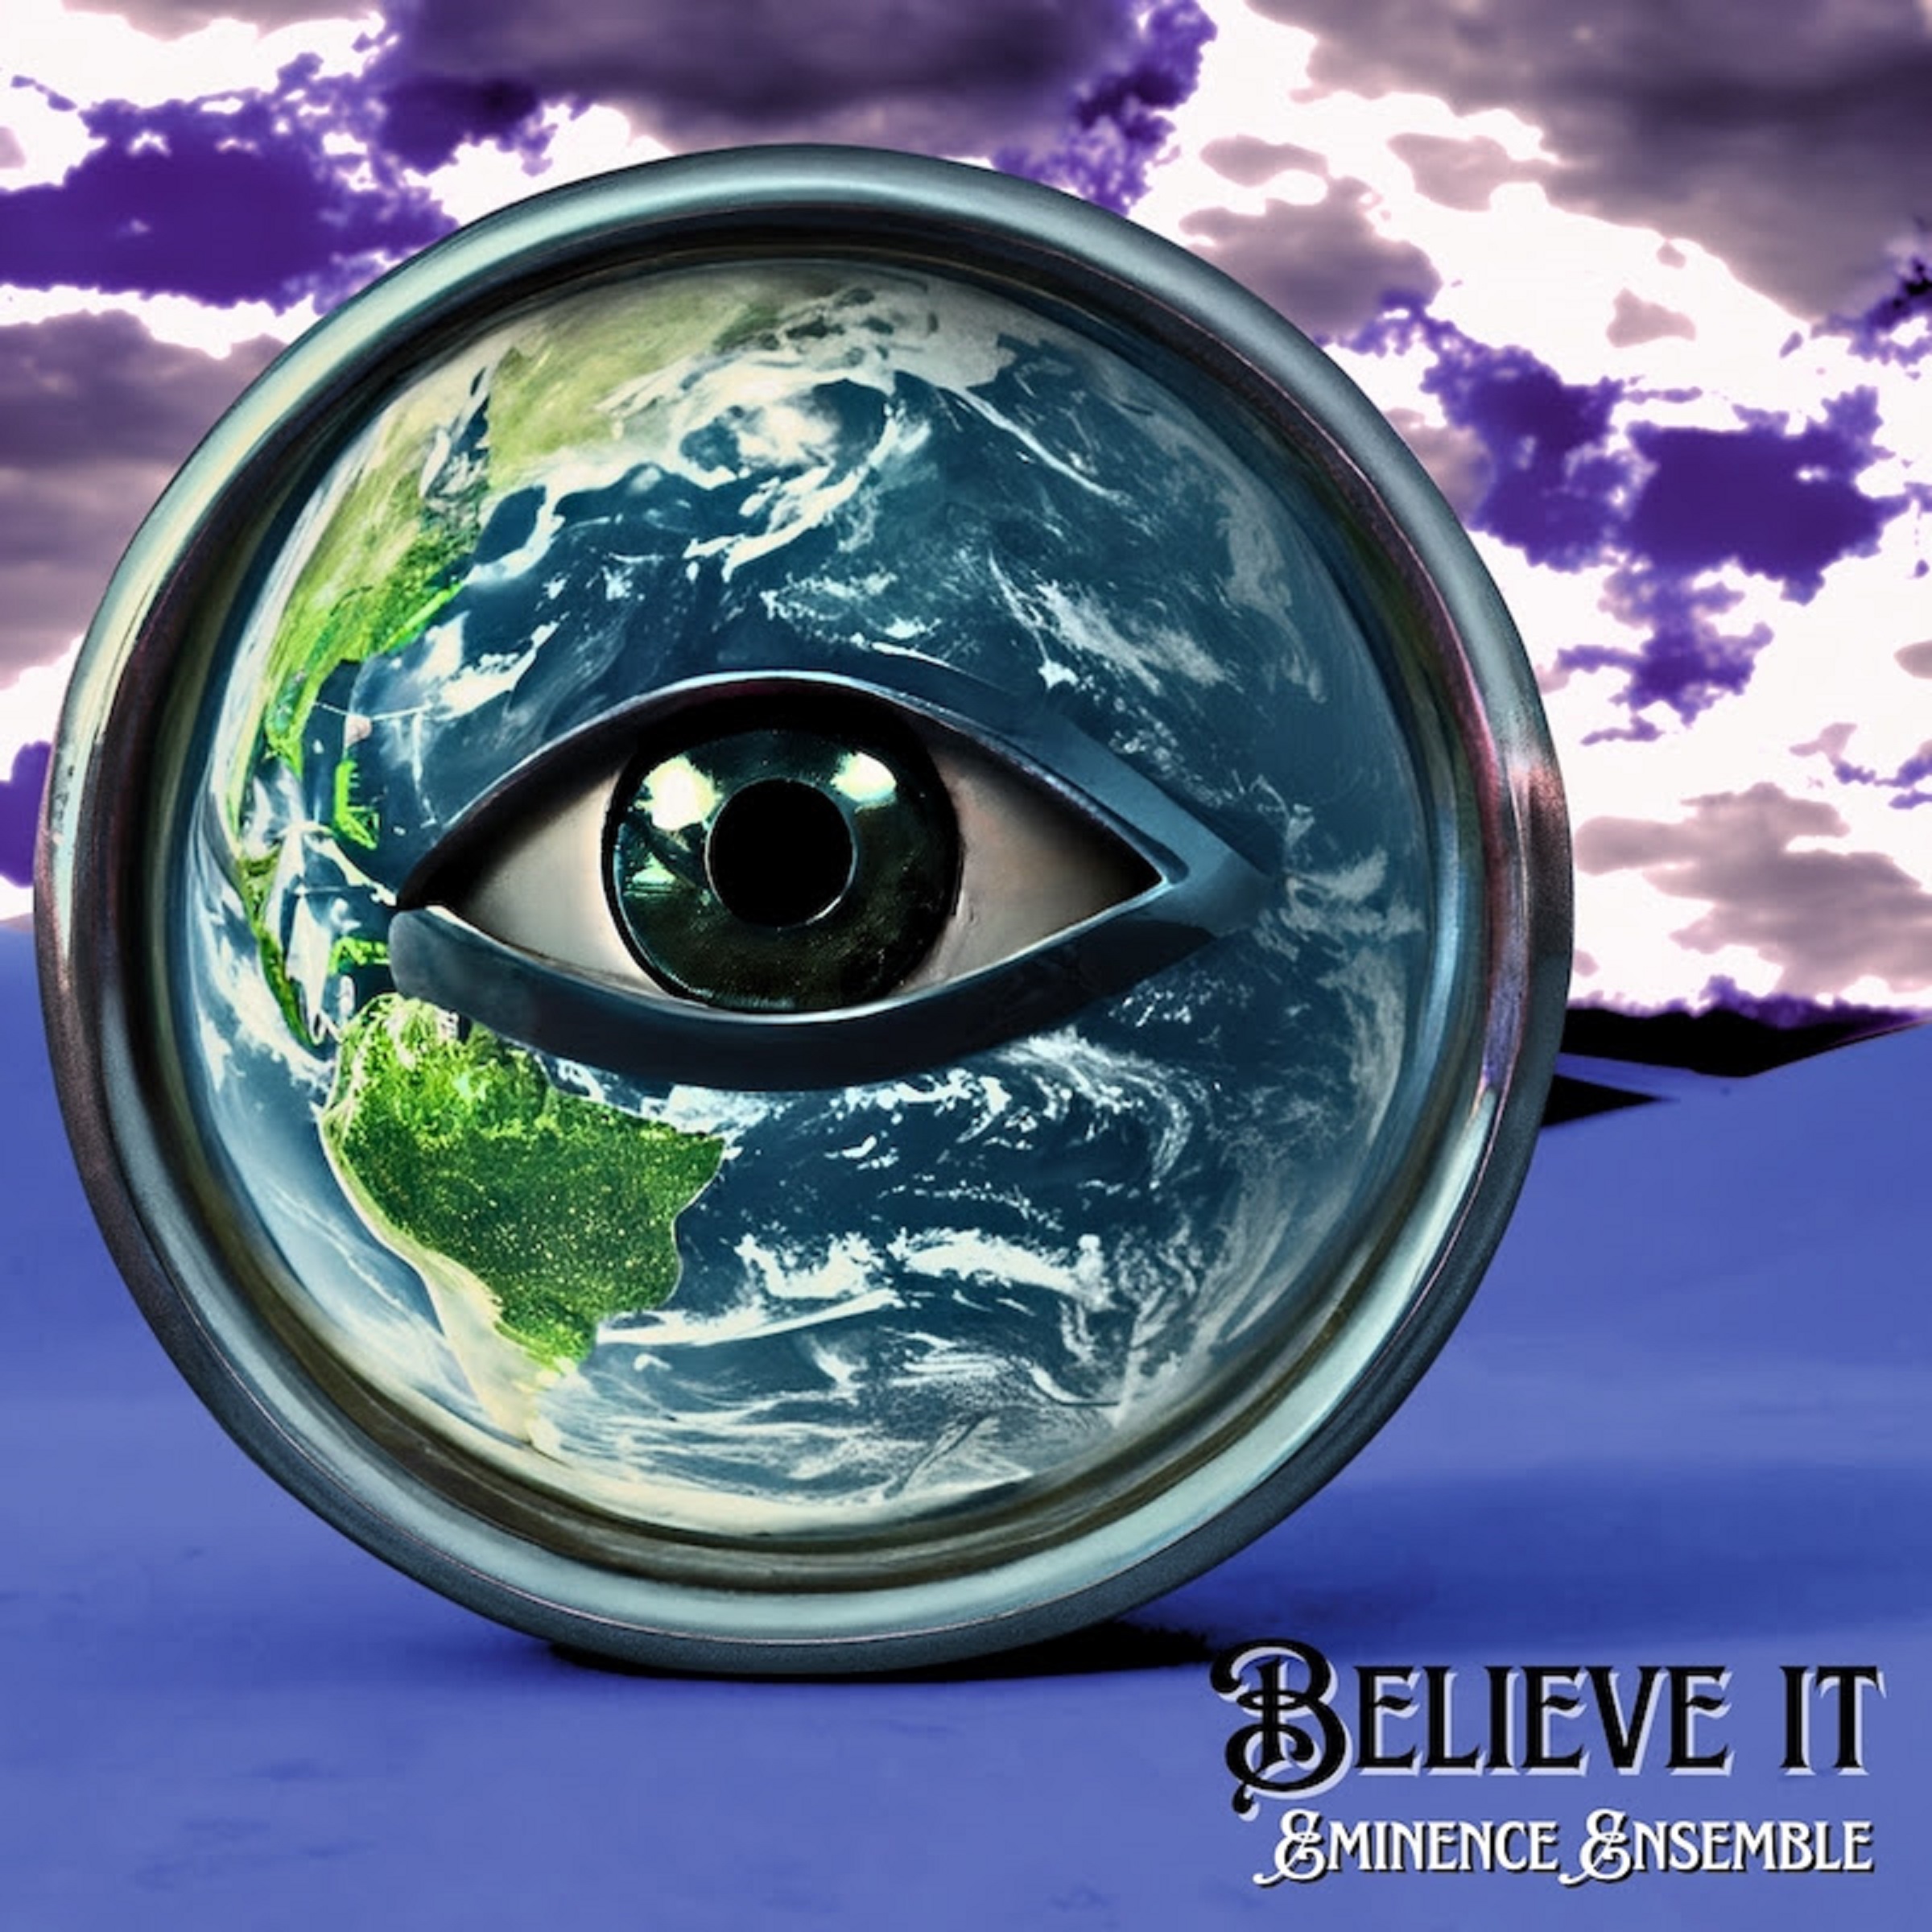 Eminence Ensemble will join The Motet on tour // drop uplifting LP single "Believe It"